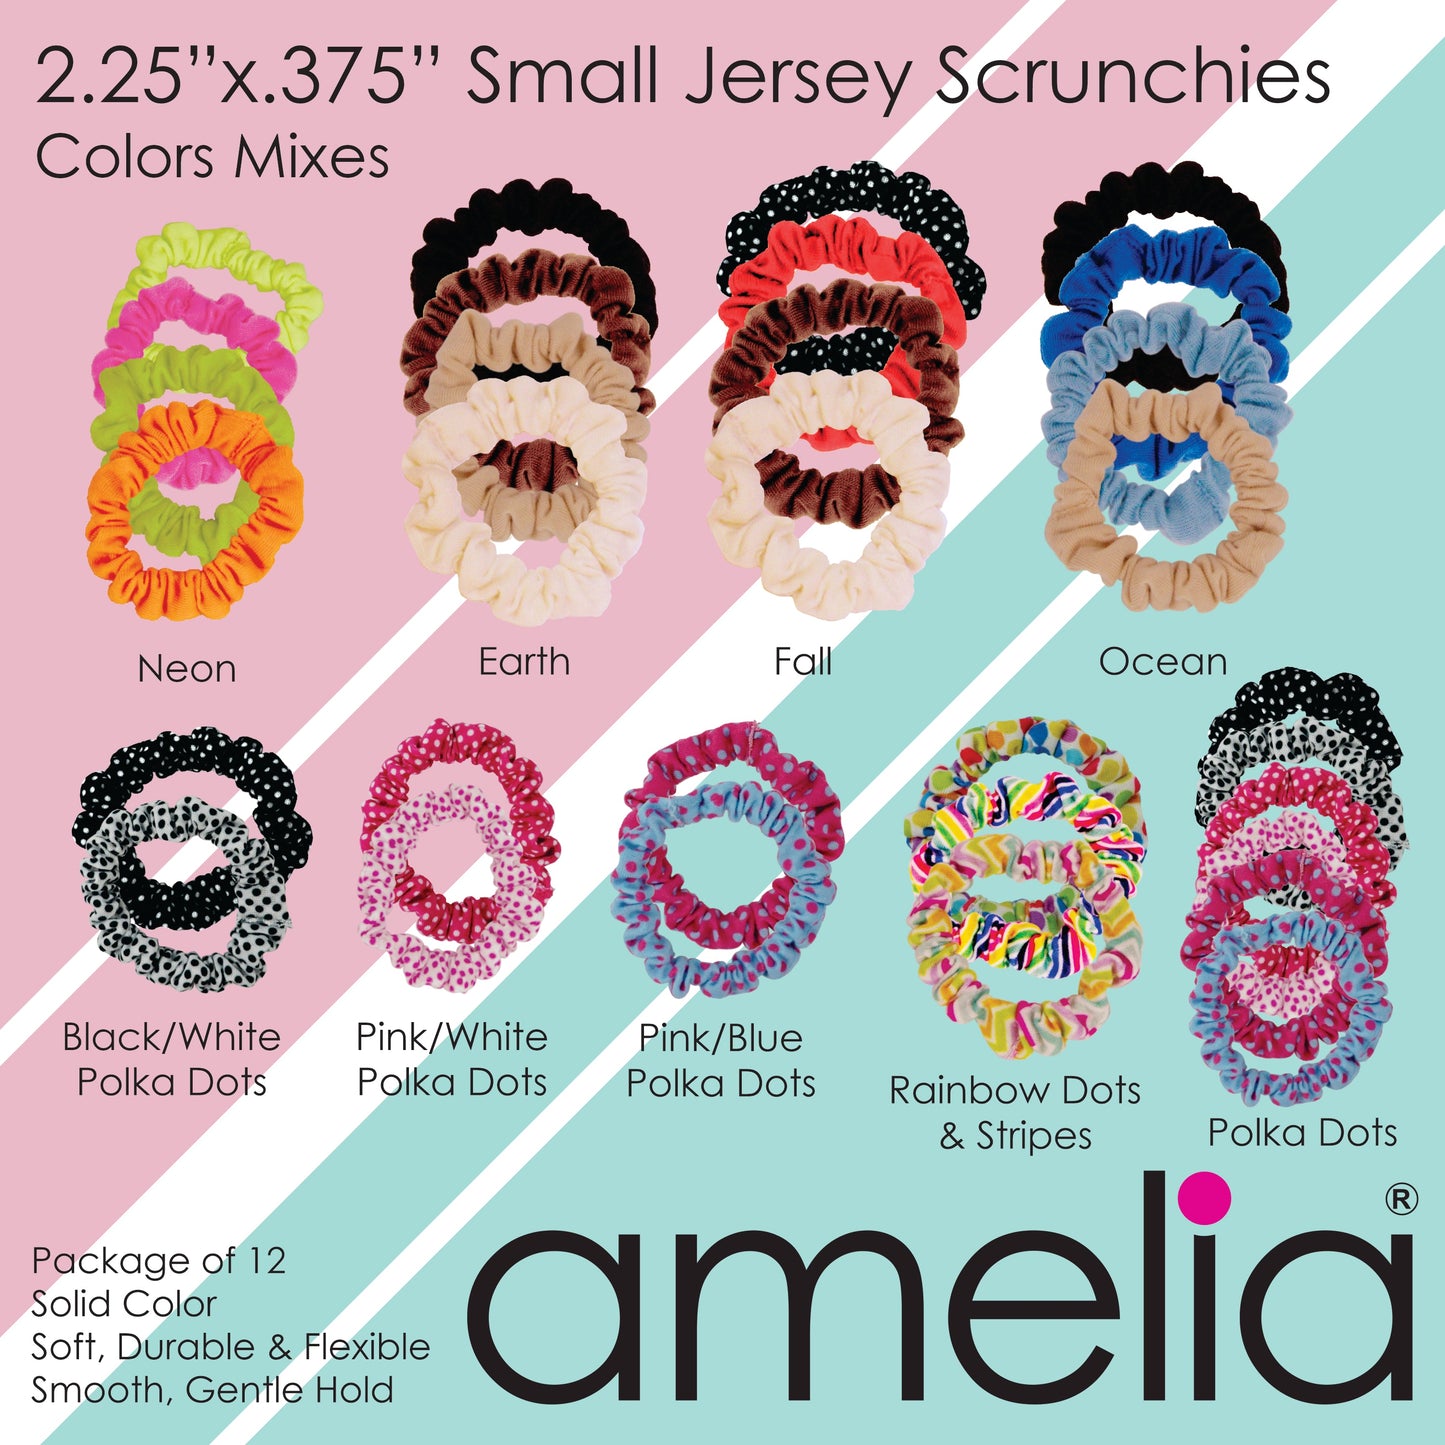 Amelia Beauty, White/Black Stripe Jersey Scrunchies, 2.25in Diameter, Gentle on Hair, Strong Hold, No Snag, No Dents or Creases. 12 Pack